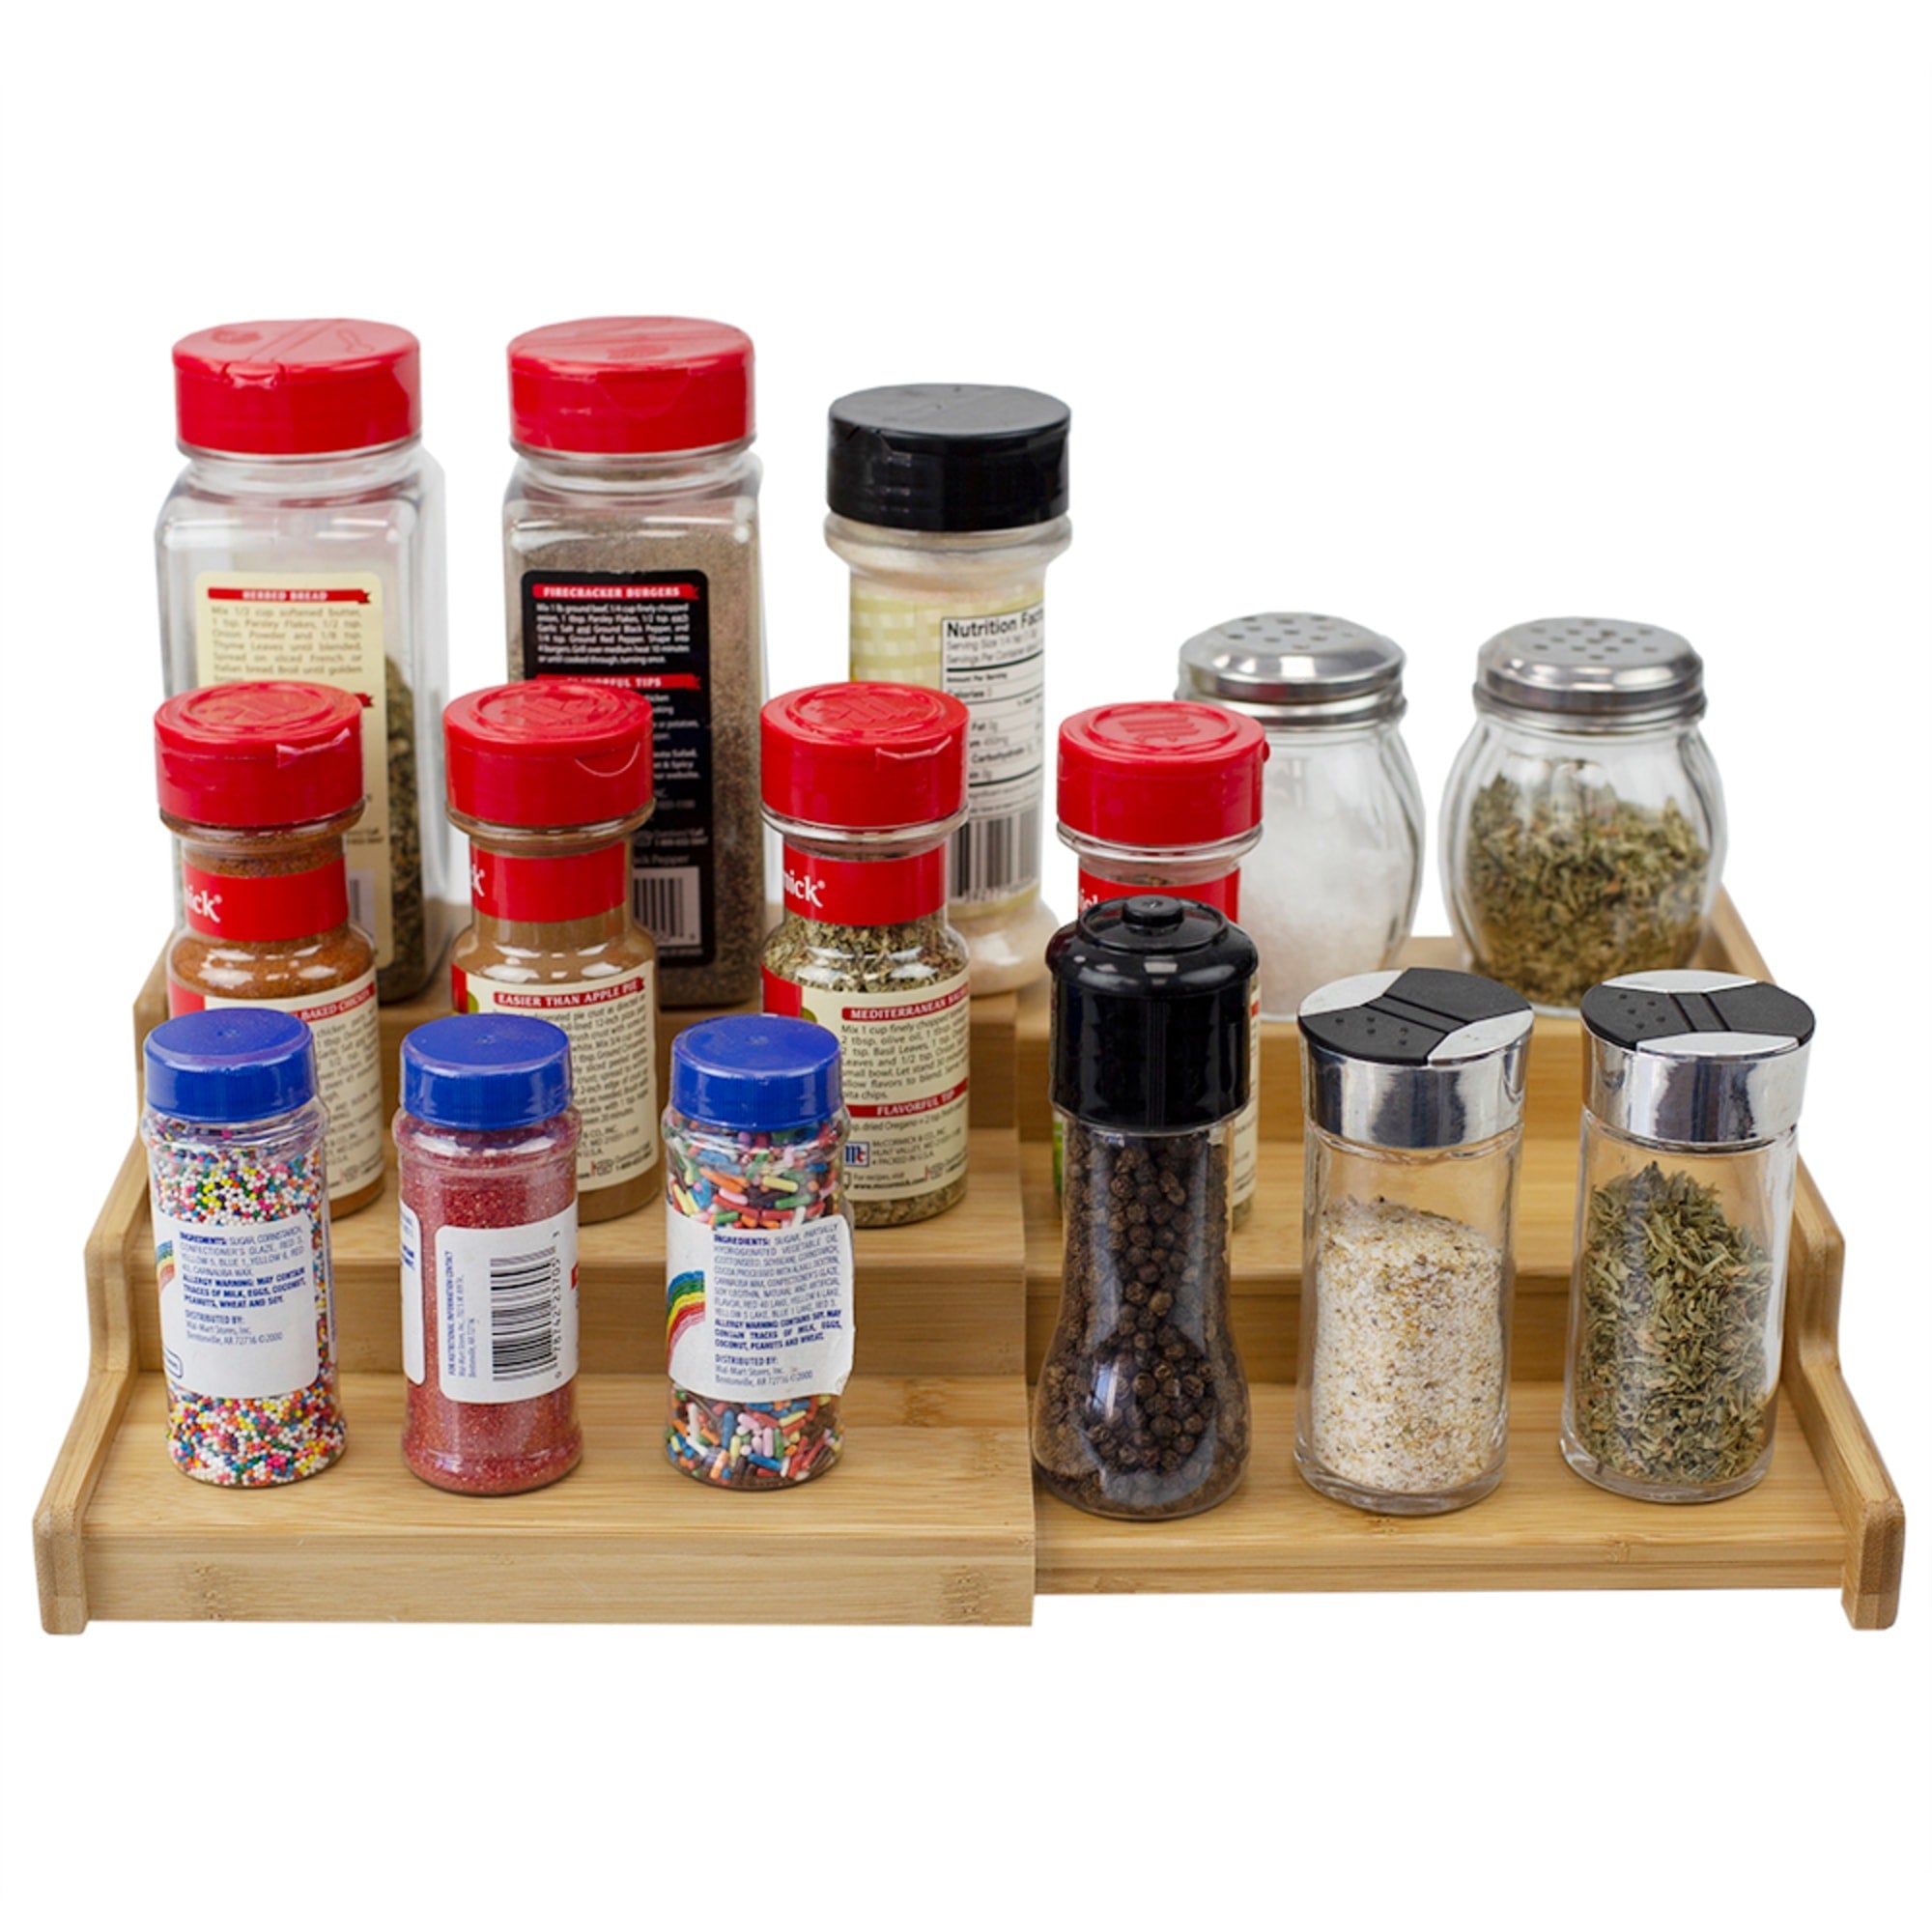 Home Basics Expandable 3 Tier Step Seasoning and Spice Organizer, Natural $10.00 EACH, CASE PACK OF 12